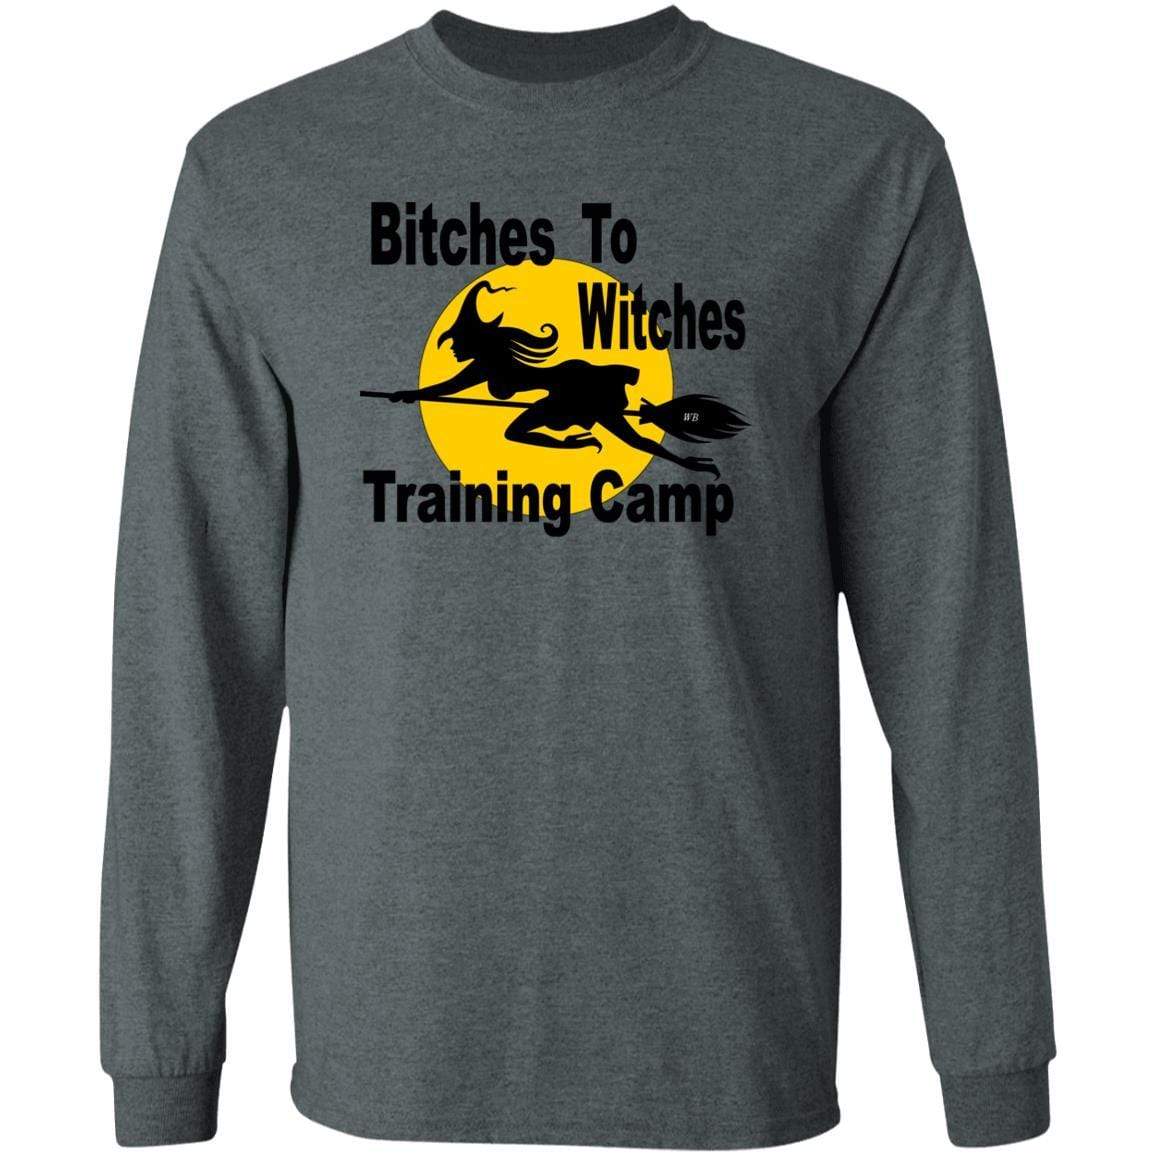 T-Shirts Dark Heather / S WineyBitches.Co "Bitches To Witches Training Camp" LS Ultra Cotton T-Shirt WineyBitchesCo